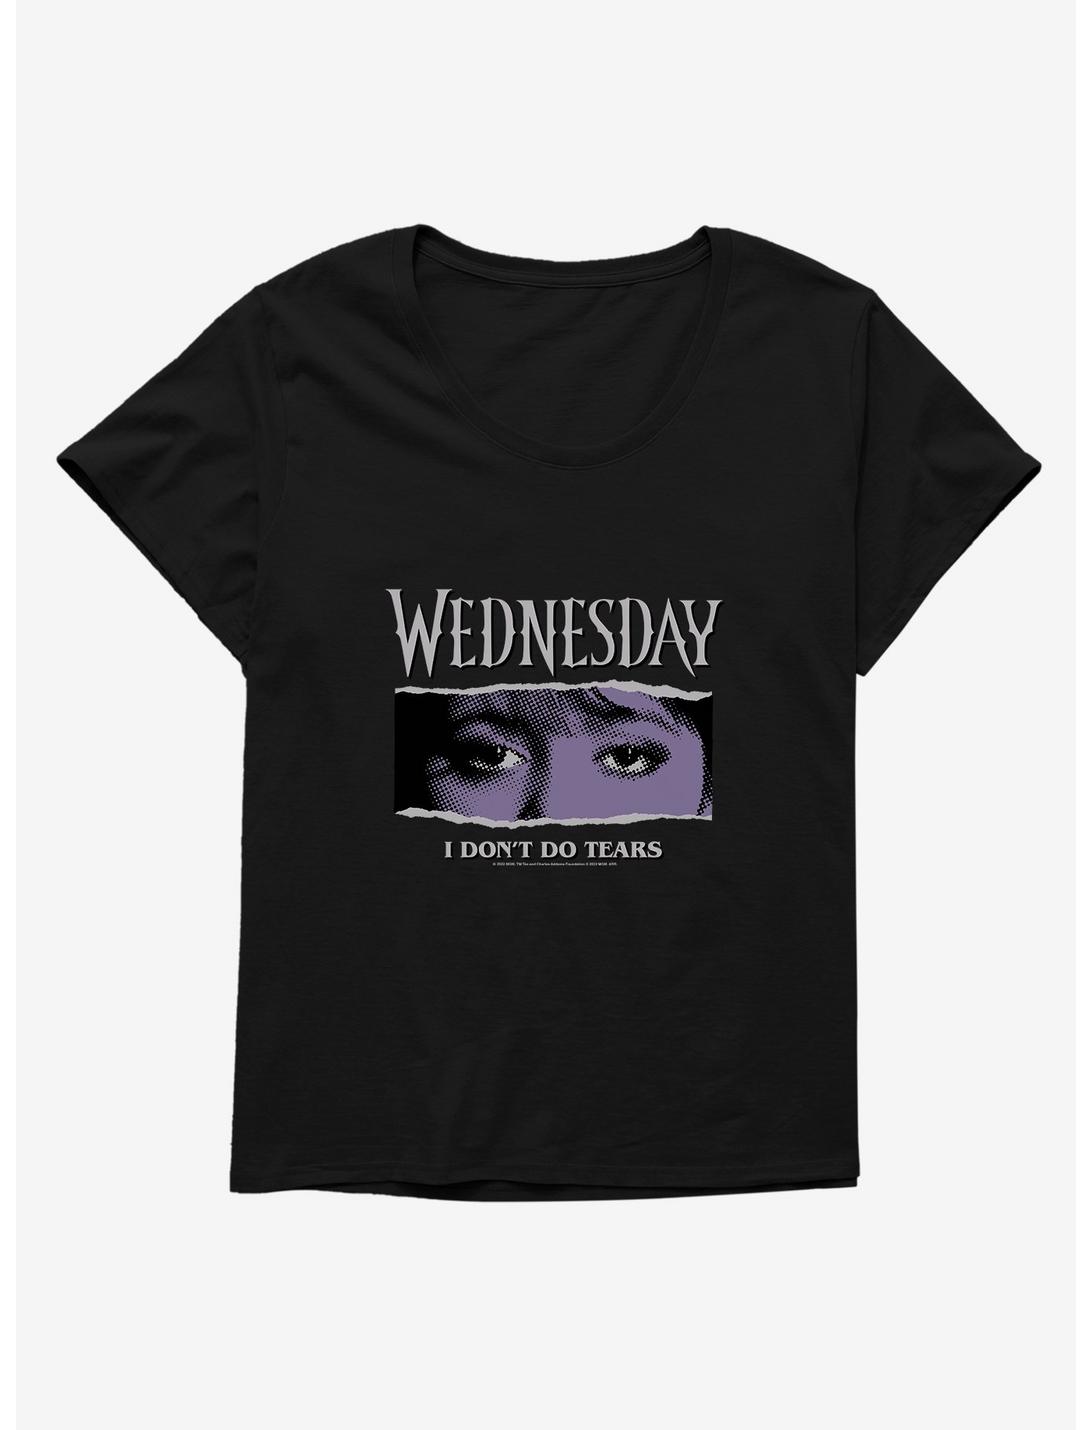 Wednesday Eyes Don't Do Tears Womens T-Shirt Plus Size, BLACK, hi-res